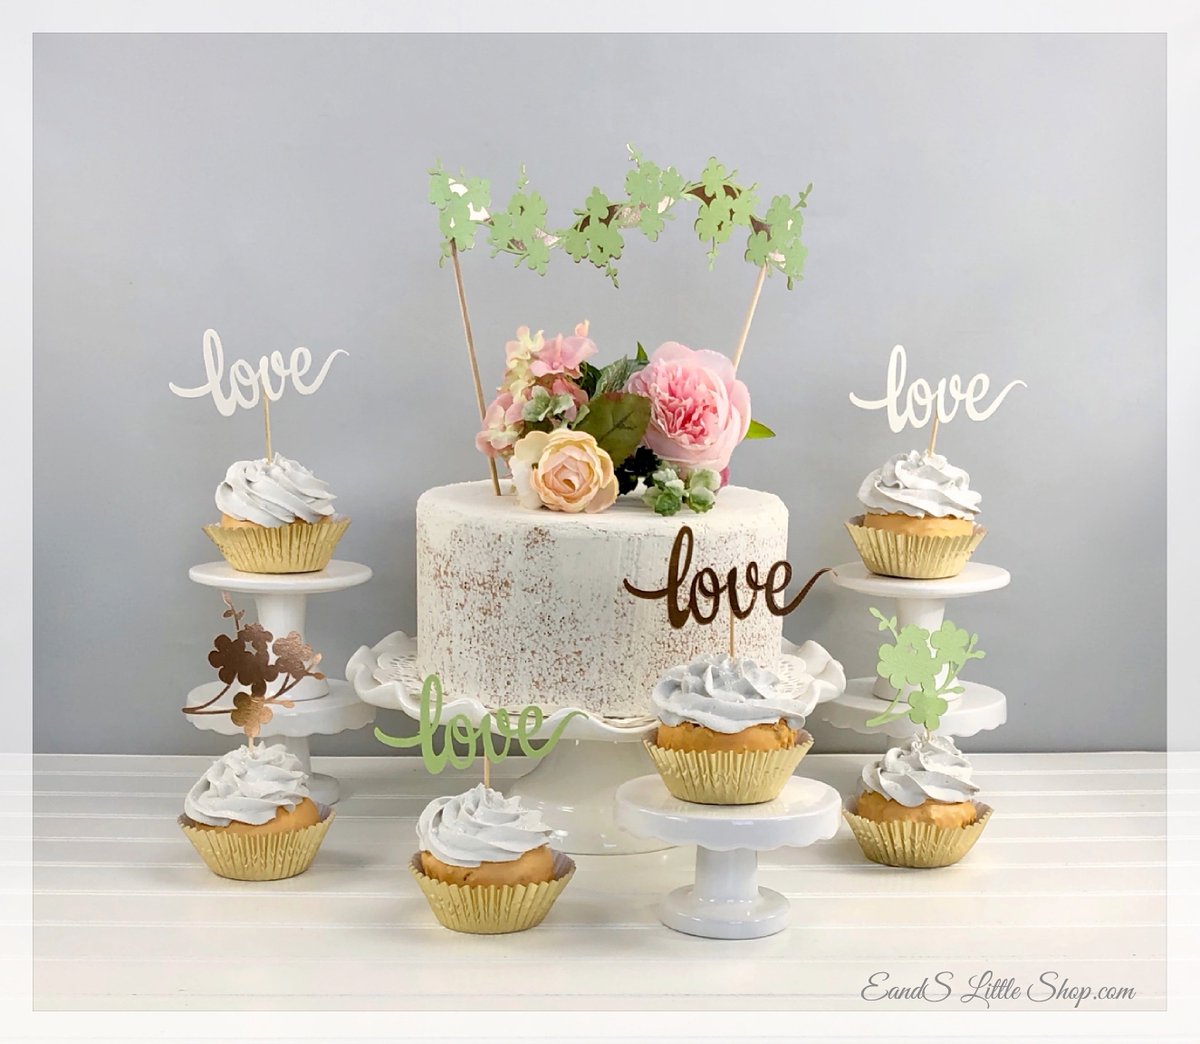 Handmade Party & Event Decor ➡️➡️ bit.ly/EtsyEandSlittl…

Check out our new Photo Booth Props, Banners, and Cake & Cupcake Toppers for your event or party! 

#photoboothprops #caketoppers #cupcaketoppers #banners #weddingdecor #babyshowerdecor #partydecor #eventdecor